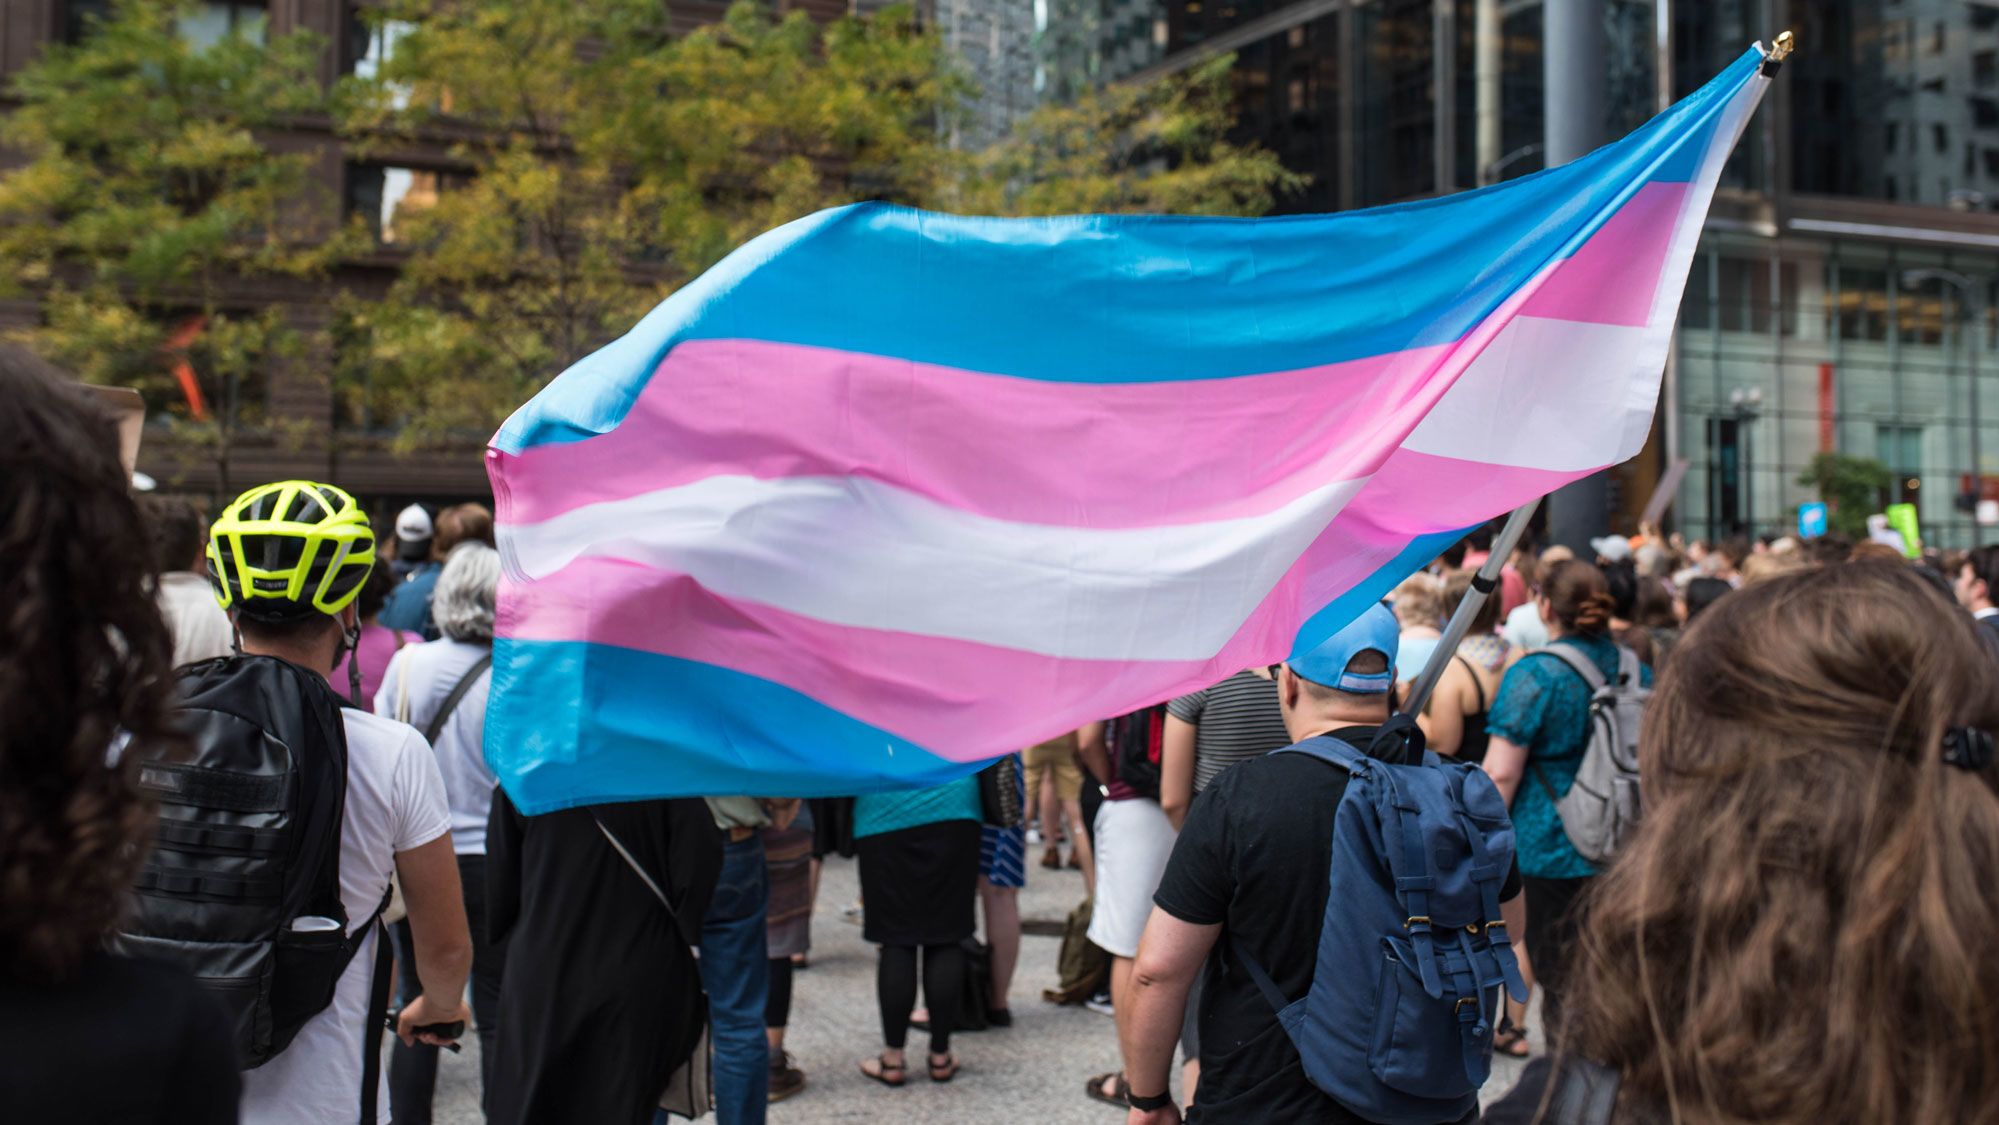 "Harry Potter" author J.K. Rowling made waves with her recent tweets about trans women and gender identity. The pictured flag represents the transgender community.